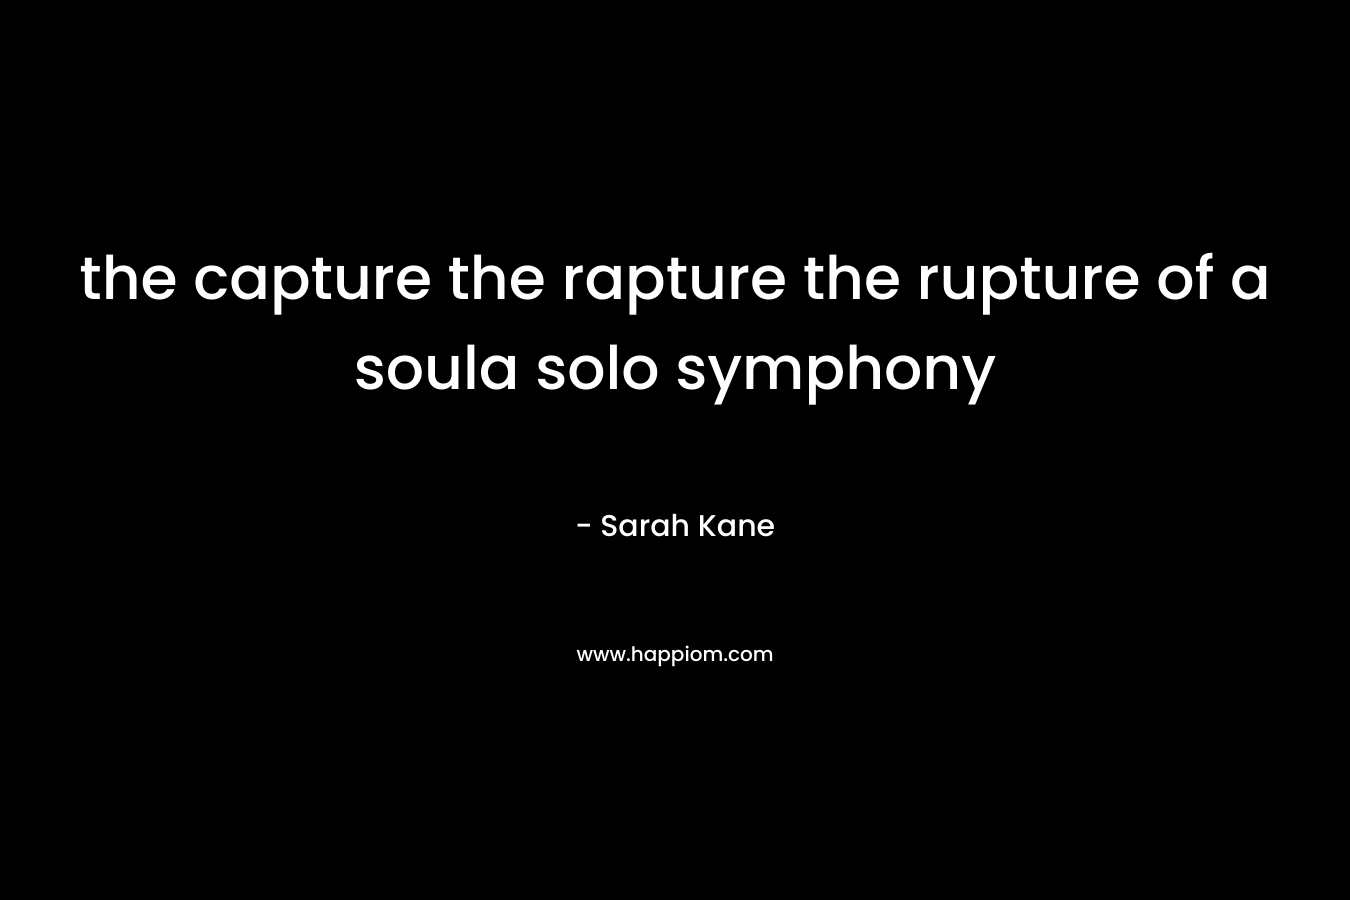 the capture the rapture the rupture of a soula solo symphony